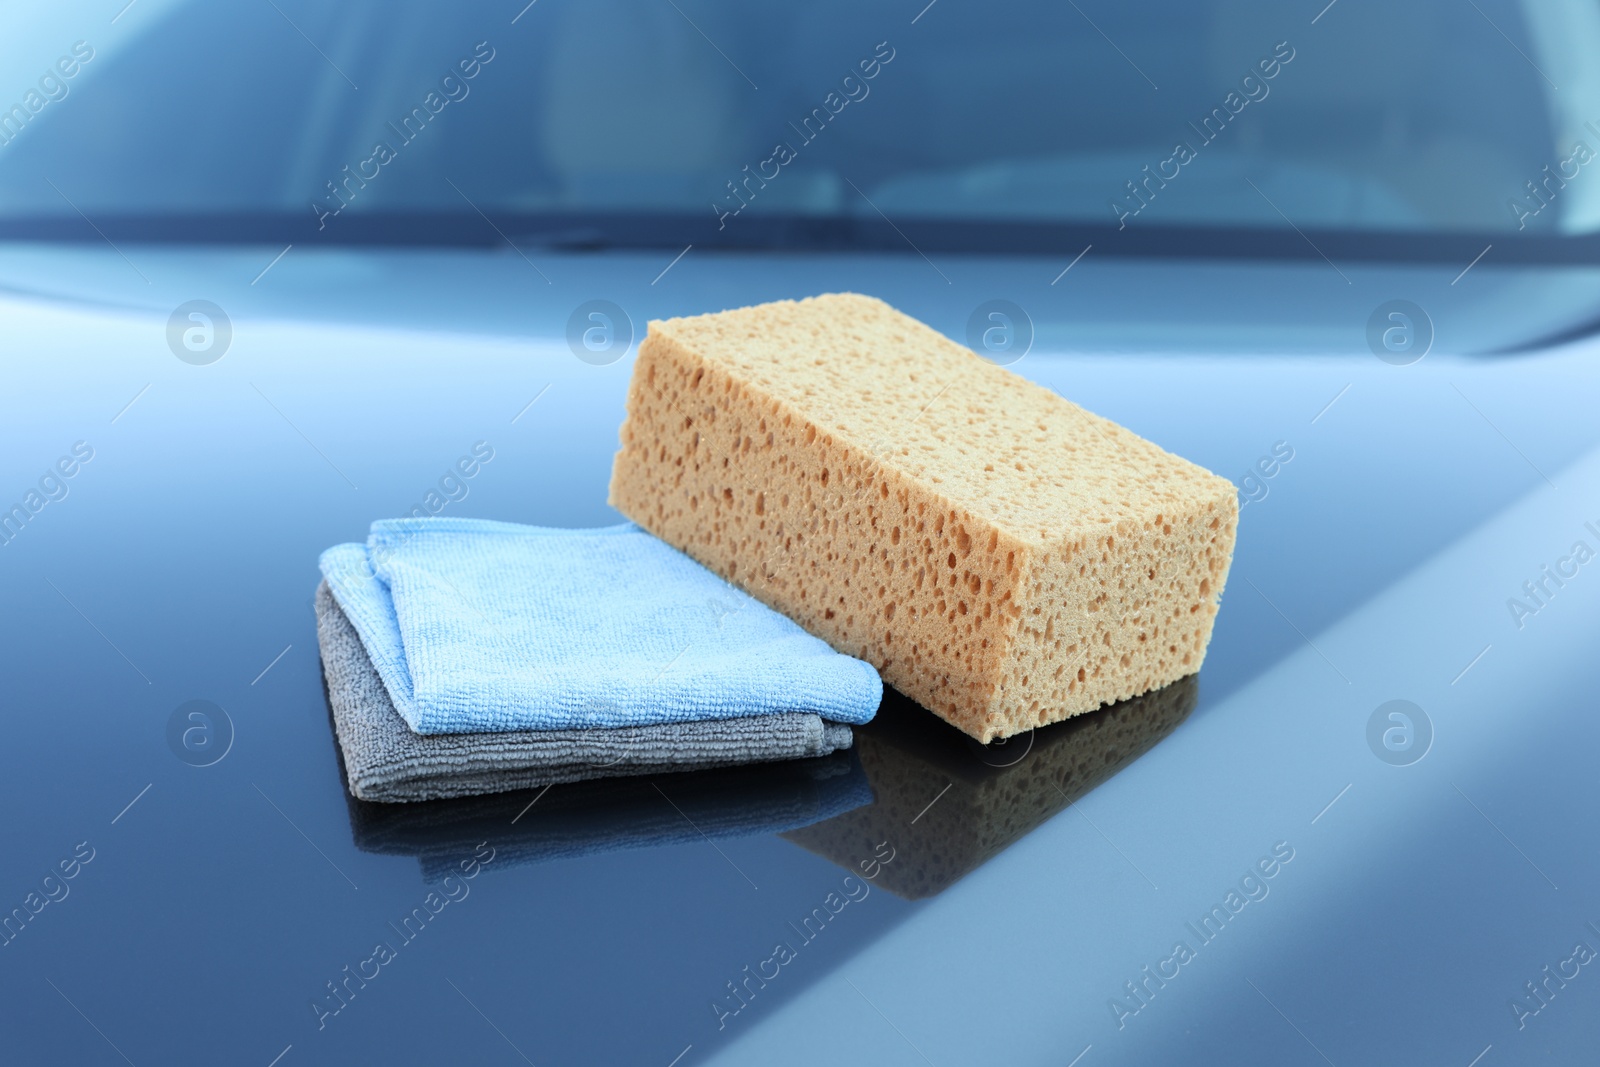 Photo of Sponge and rags on car hood. Cleaning products